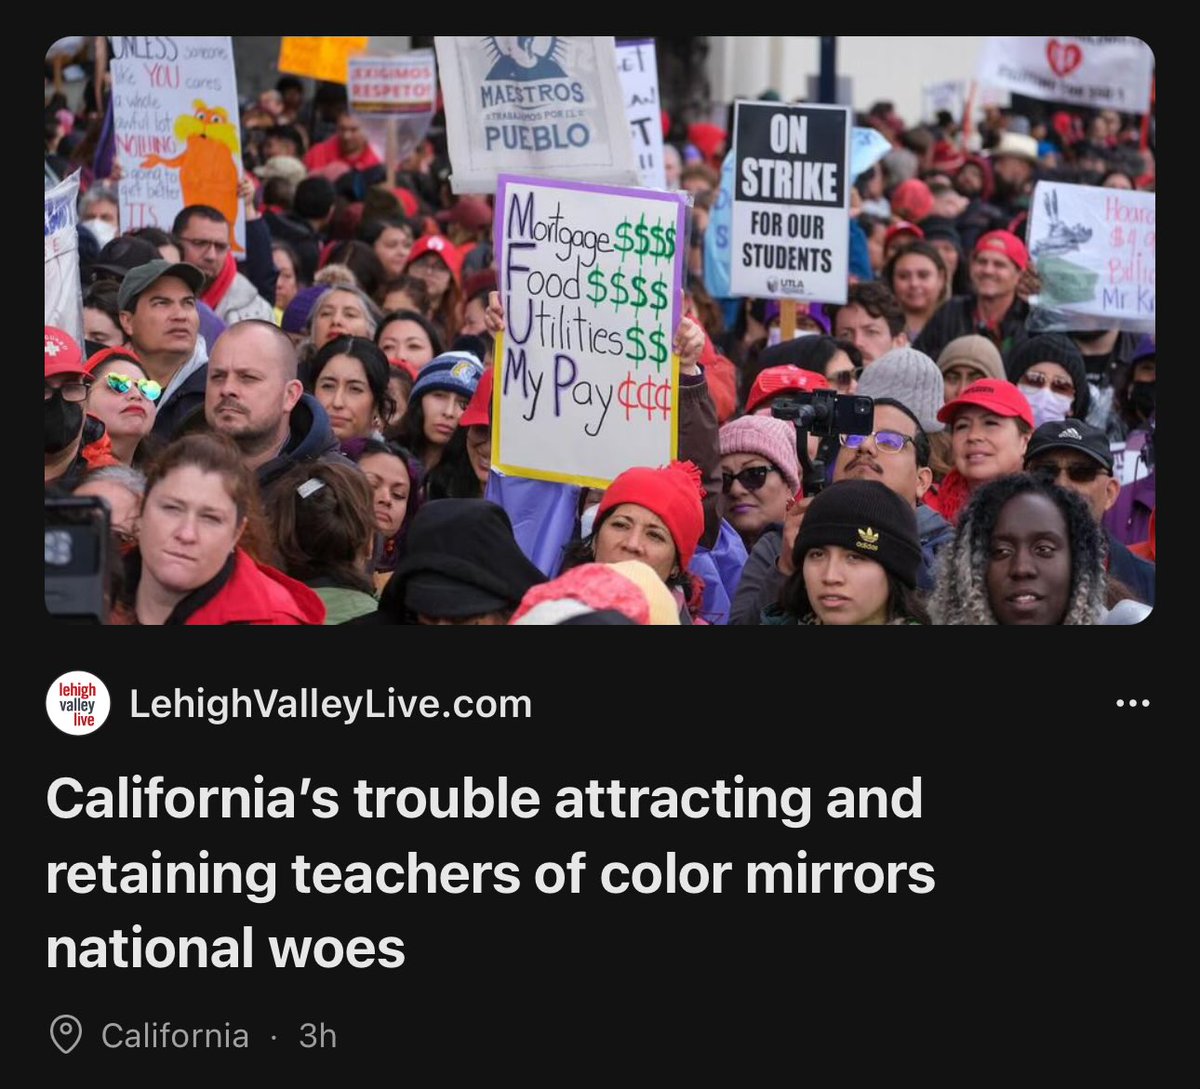 California is having trouble attracting teachers period race has nothing to do with it. What decent person would want to teach in our woke schools and be members of a corrup union? @WeAreCTA @GavinNewsom @TonyThurmond @ilike_mike @CASpeakerRivas